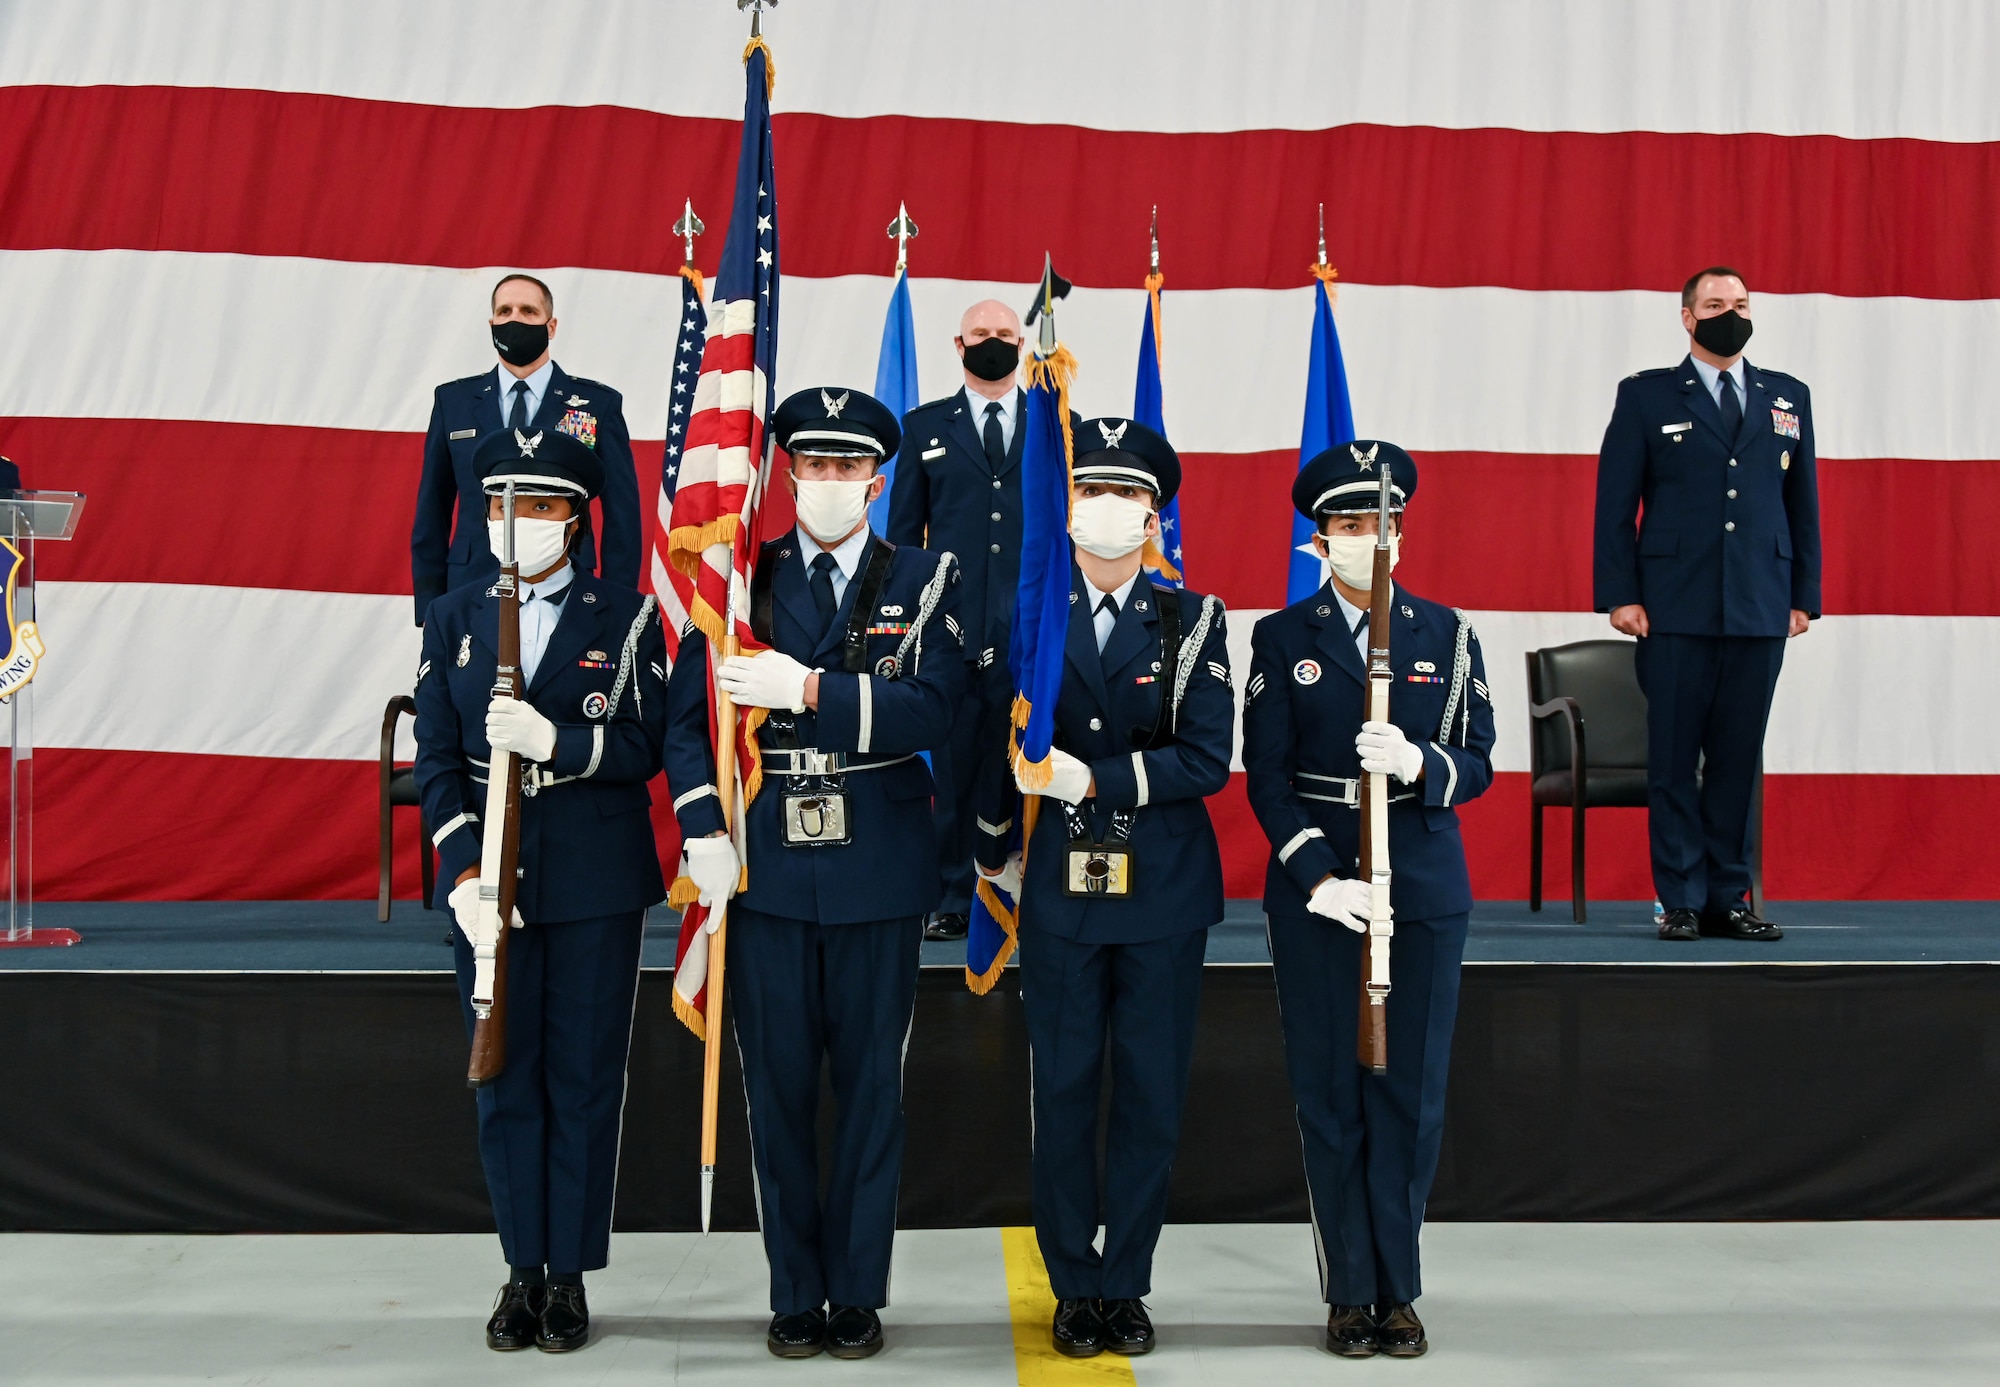 The 507th Air Refueling Wing welcomes a new wing commander, Col. Michael Parks, during a change of command ceremony Nov. 8, 2020, at Tinker Air Force Base, Oklahoma. (U.S. Air Force photo by Senior Airman Mary Begy)